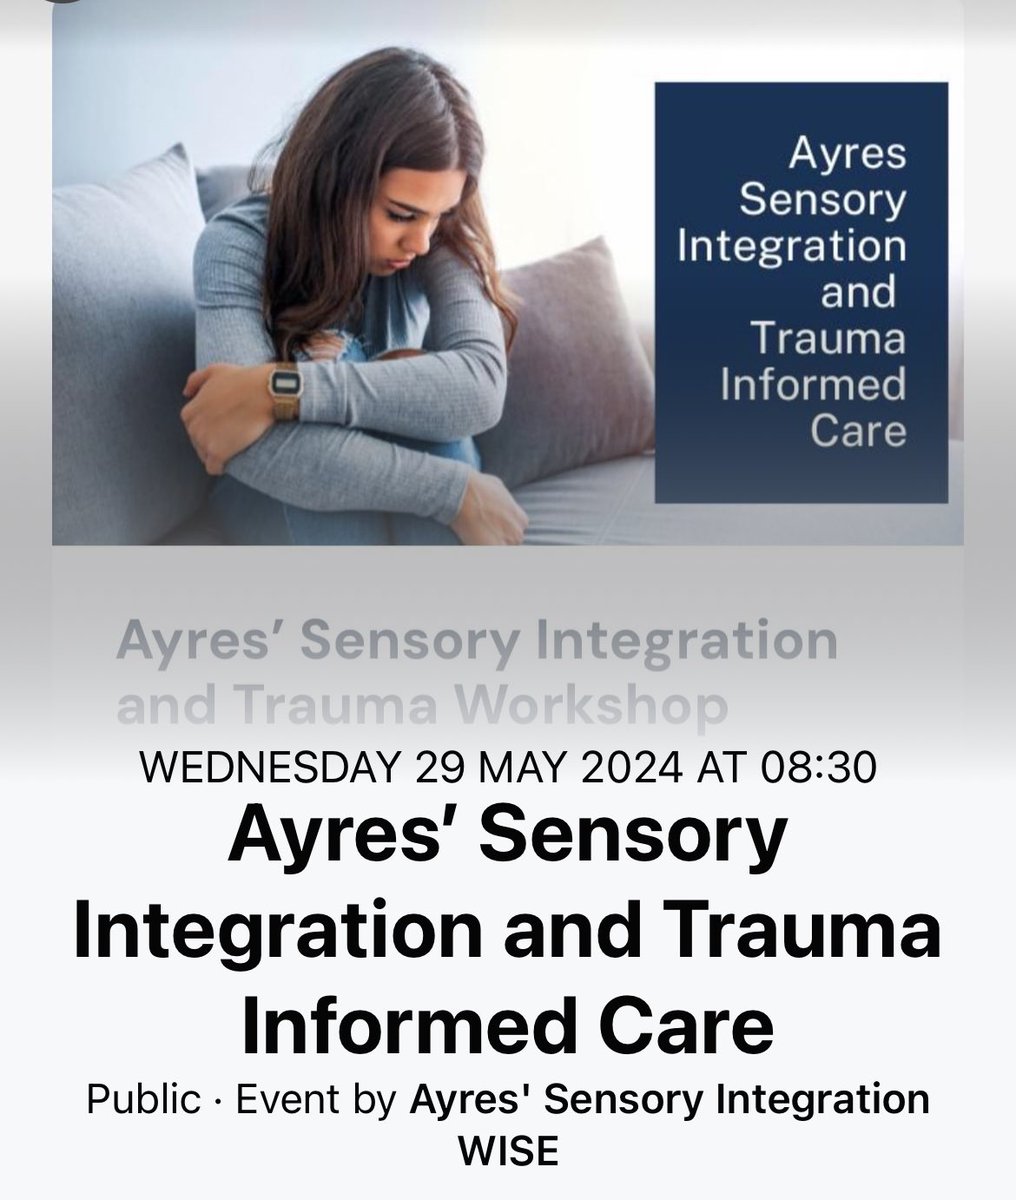 29 May, 5 & 14 June 2024. Join us for an interactive workshop, live on Zoom. You will experience deep dive into how Ayres’ theory and model provides a bridge between changes to the nervous system through trauma and participation in everyday life. This includes exploring how